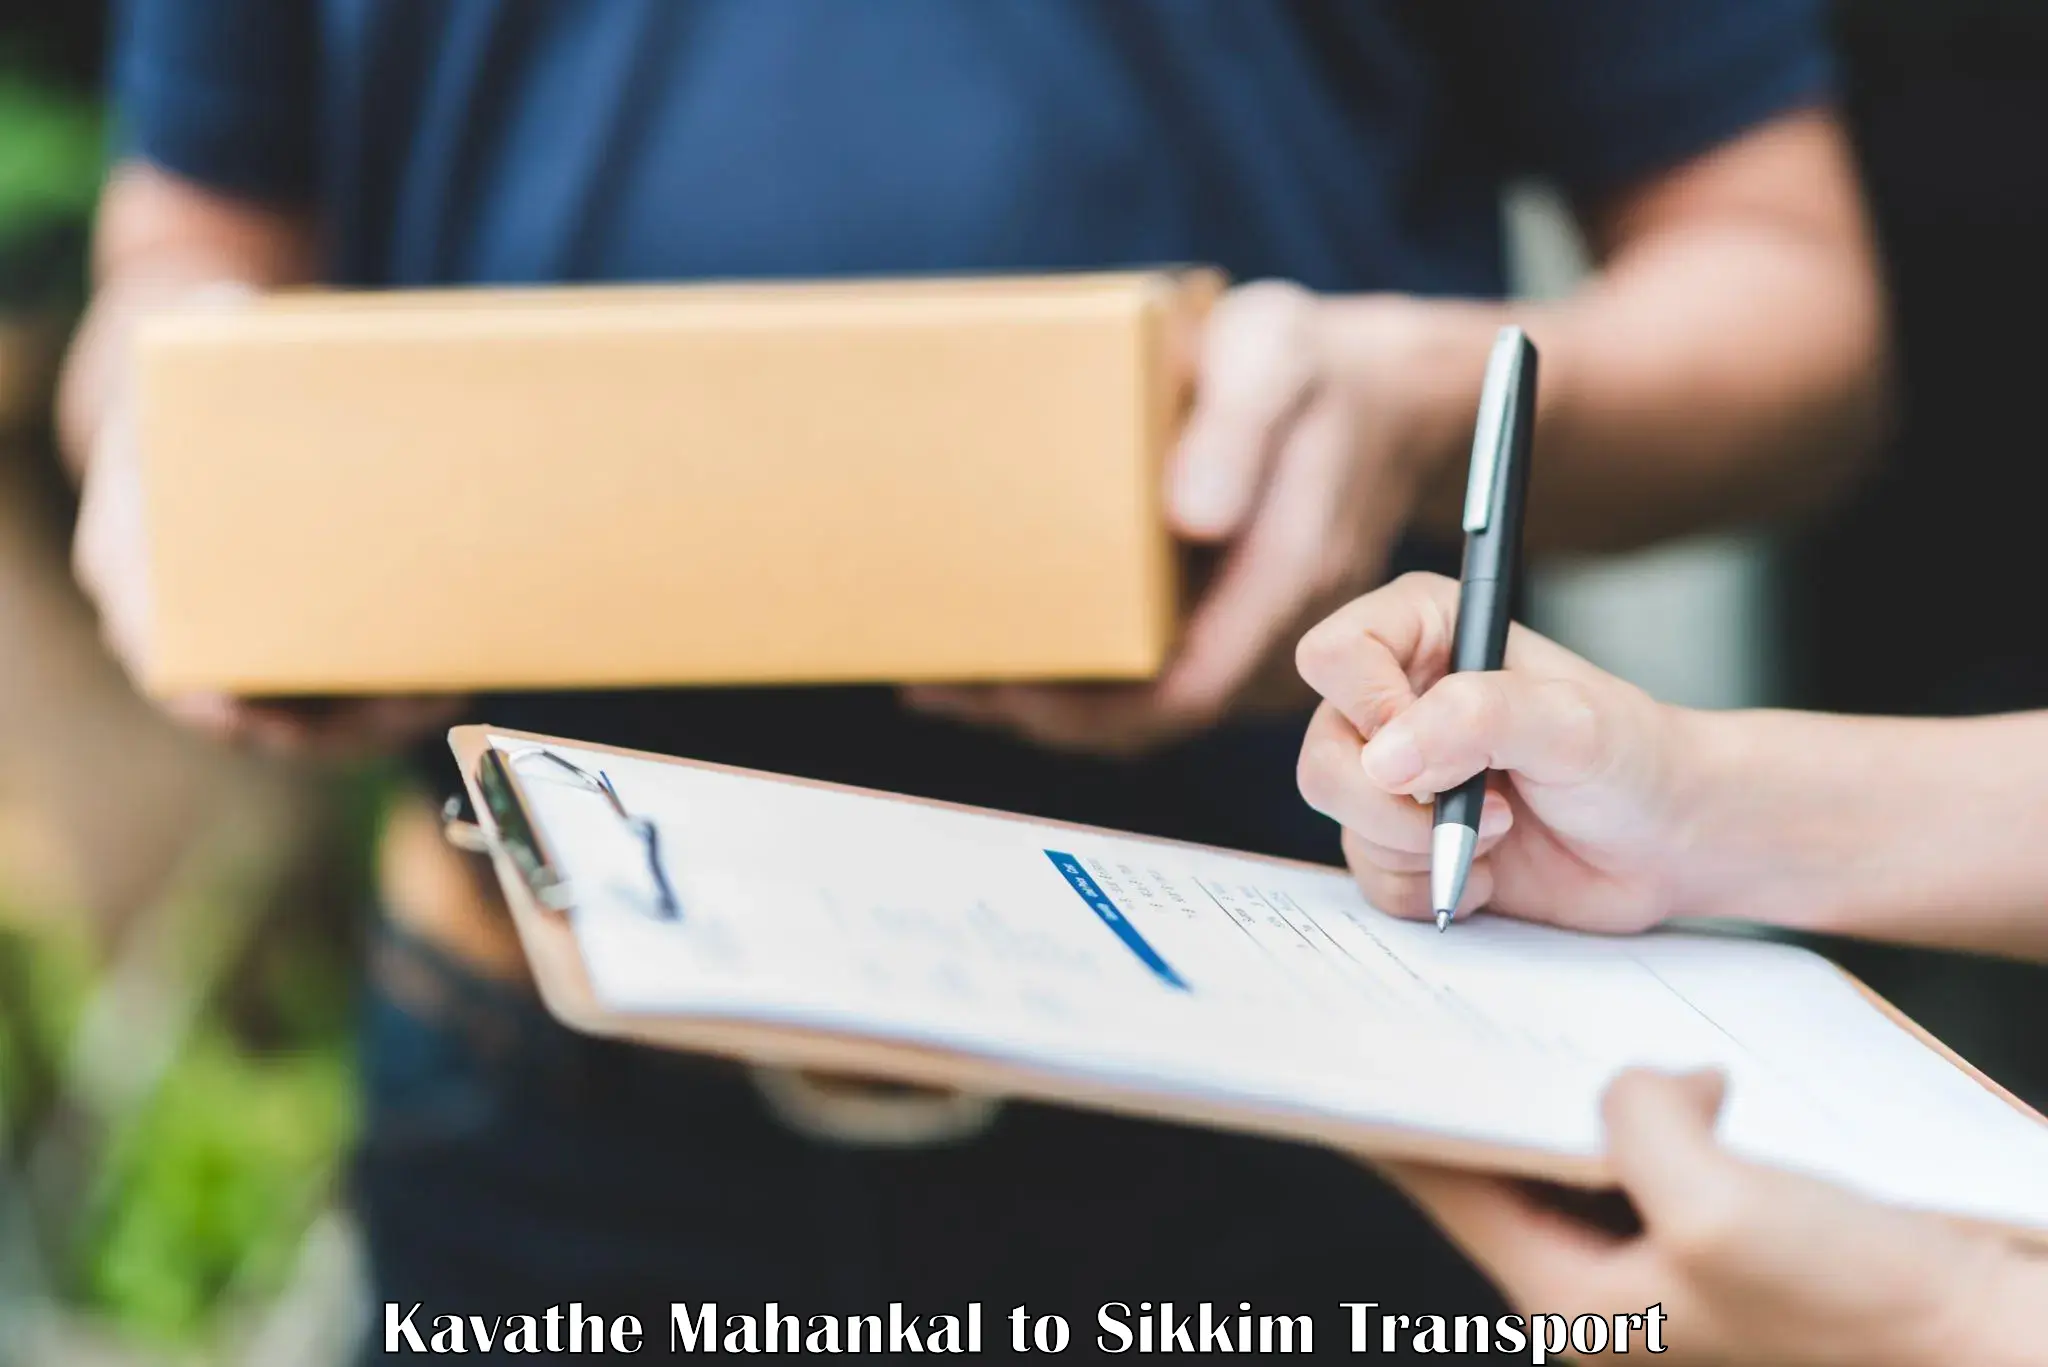 Material transport services Kavathe Mahankal to Pelling